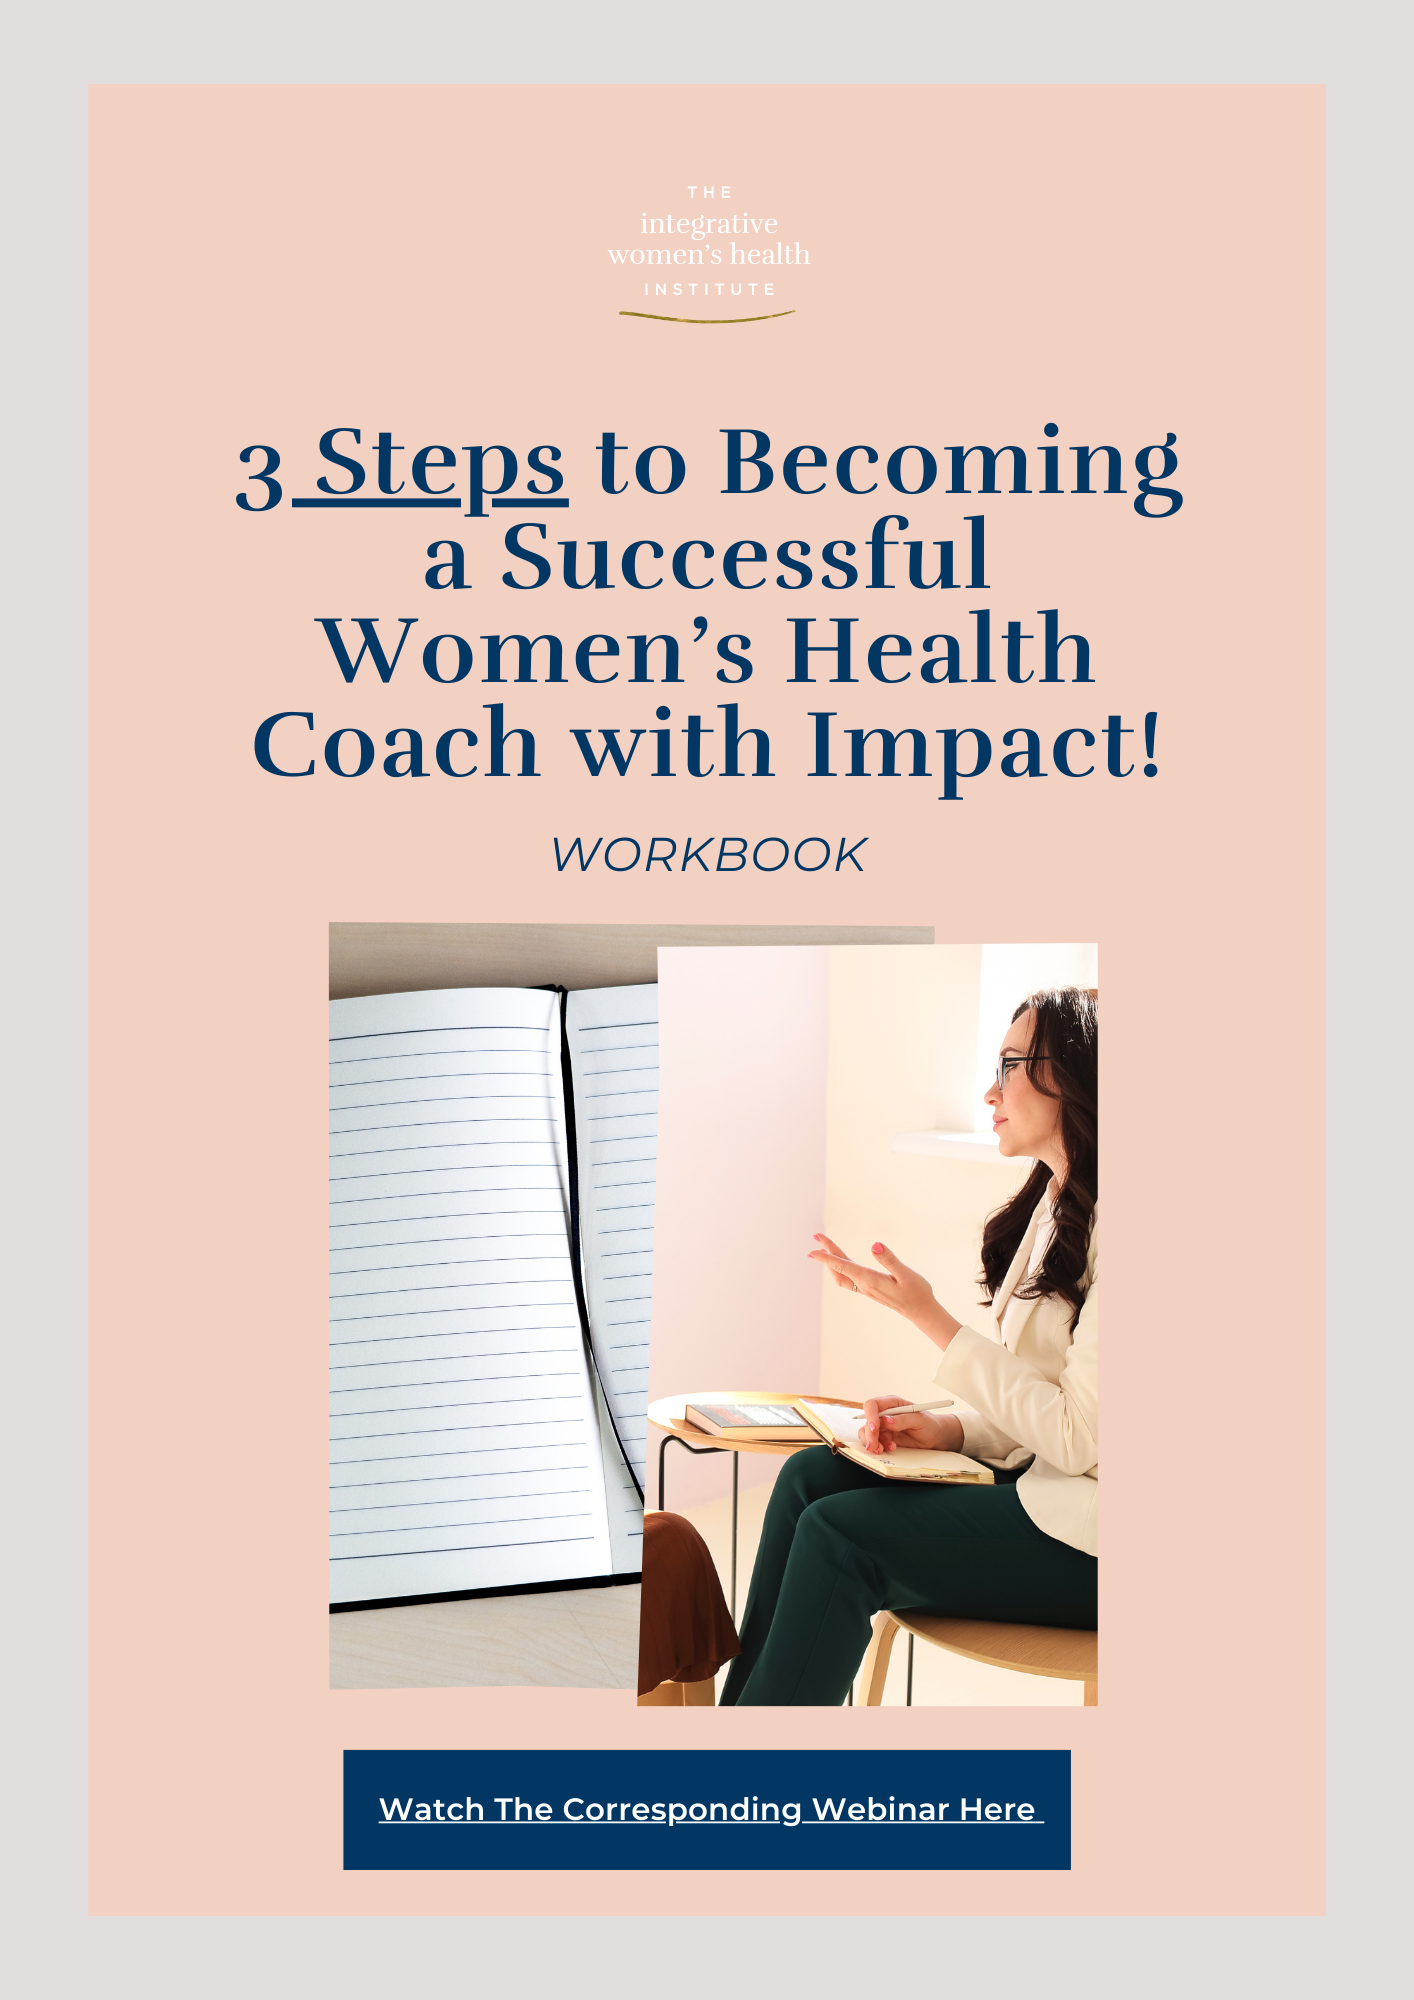 3 Steps to becoming a successful women's health coach with impact workbook